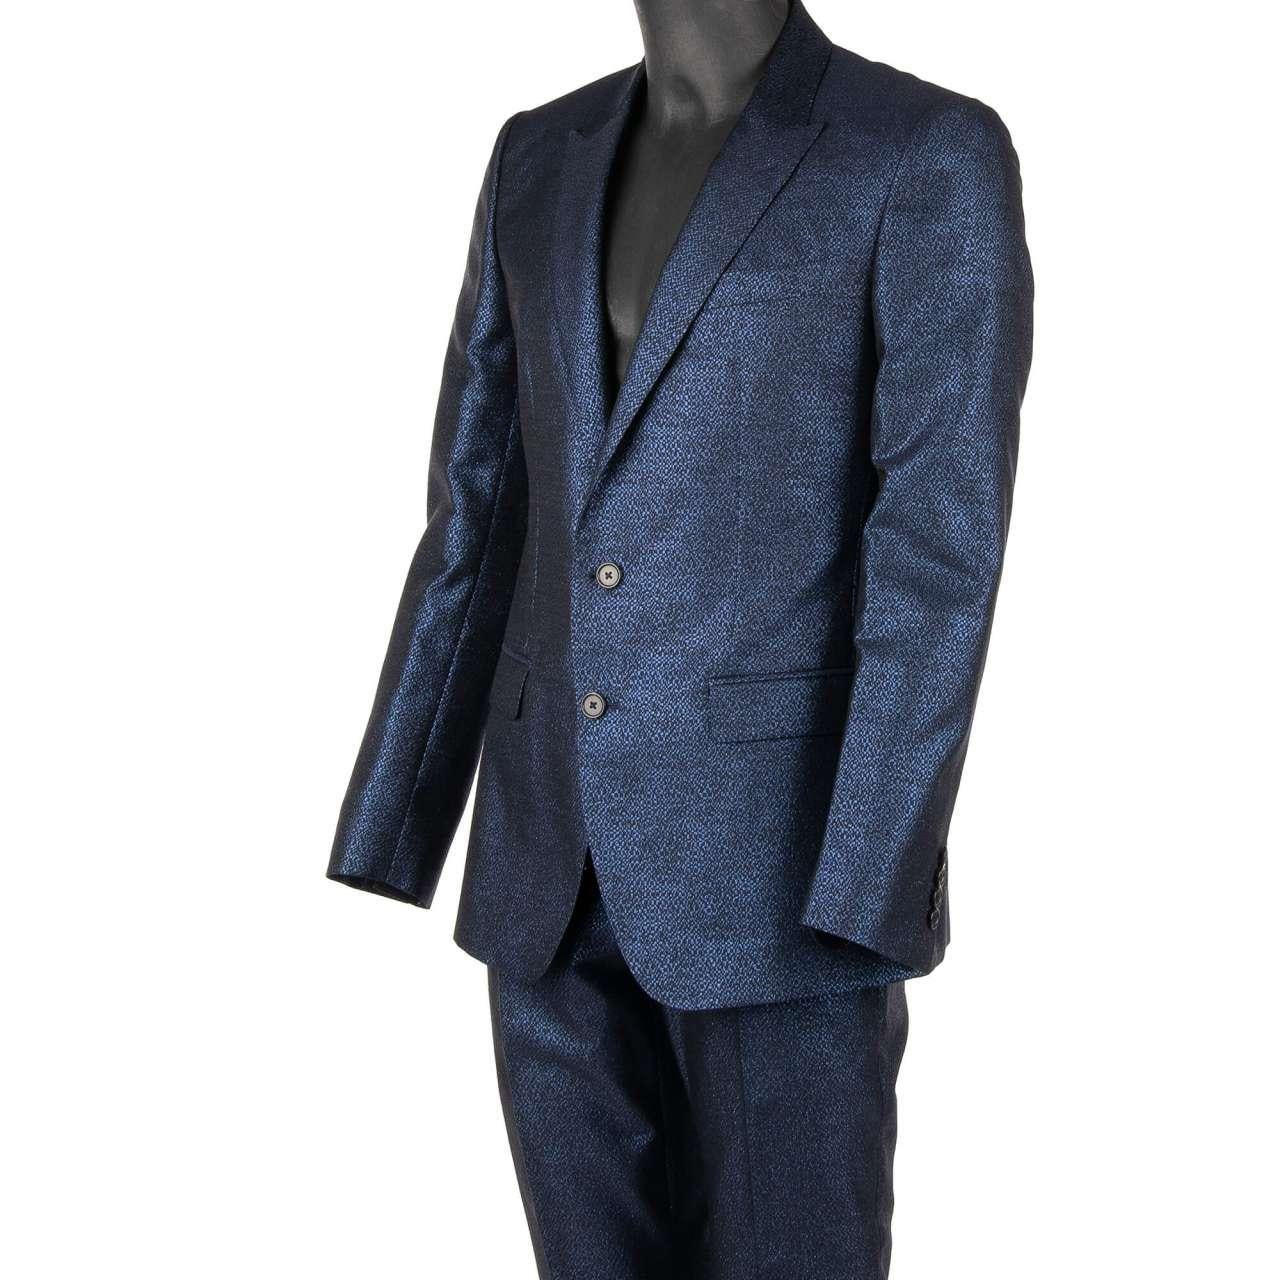 - Metallic jacquard suit with peak lapel in blue and black by DOLCE & GABBANA - MARTINI Model - RUNWAY - Dolce & Gabbana Fashion Show - New with tag - Former RRP: EUR 2,250 - MADE in ITALY - Slim Fit - Model: GK0RMT-FJM52-S8354 - Material: 43%